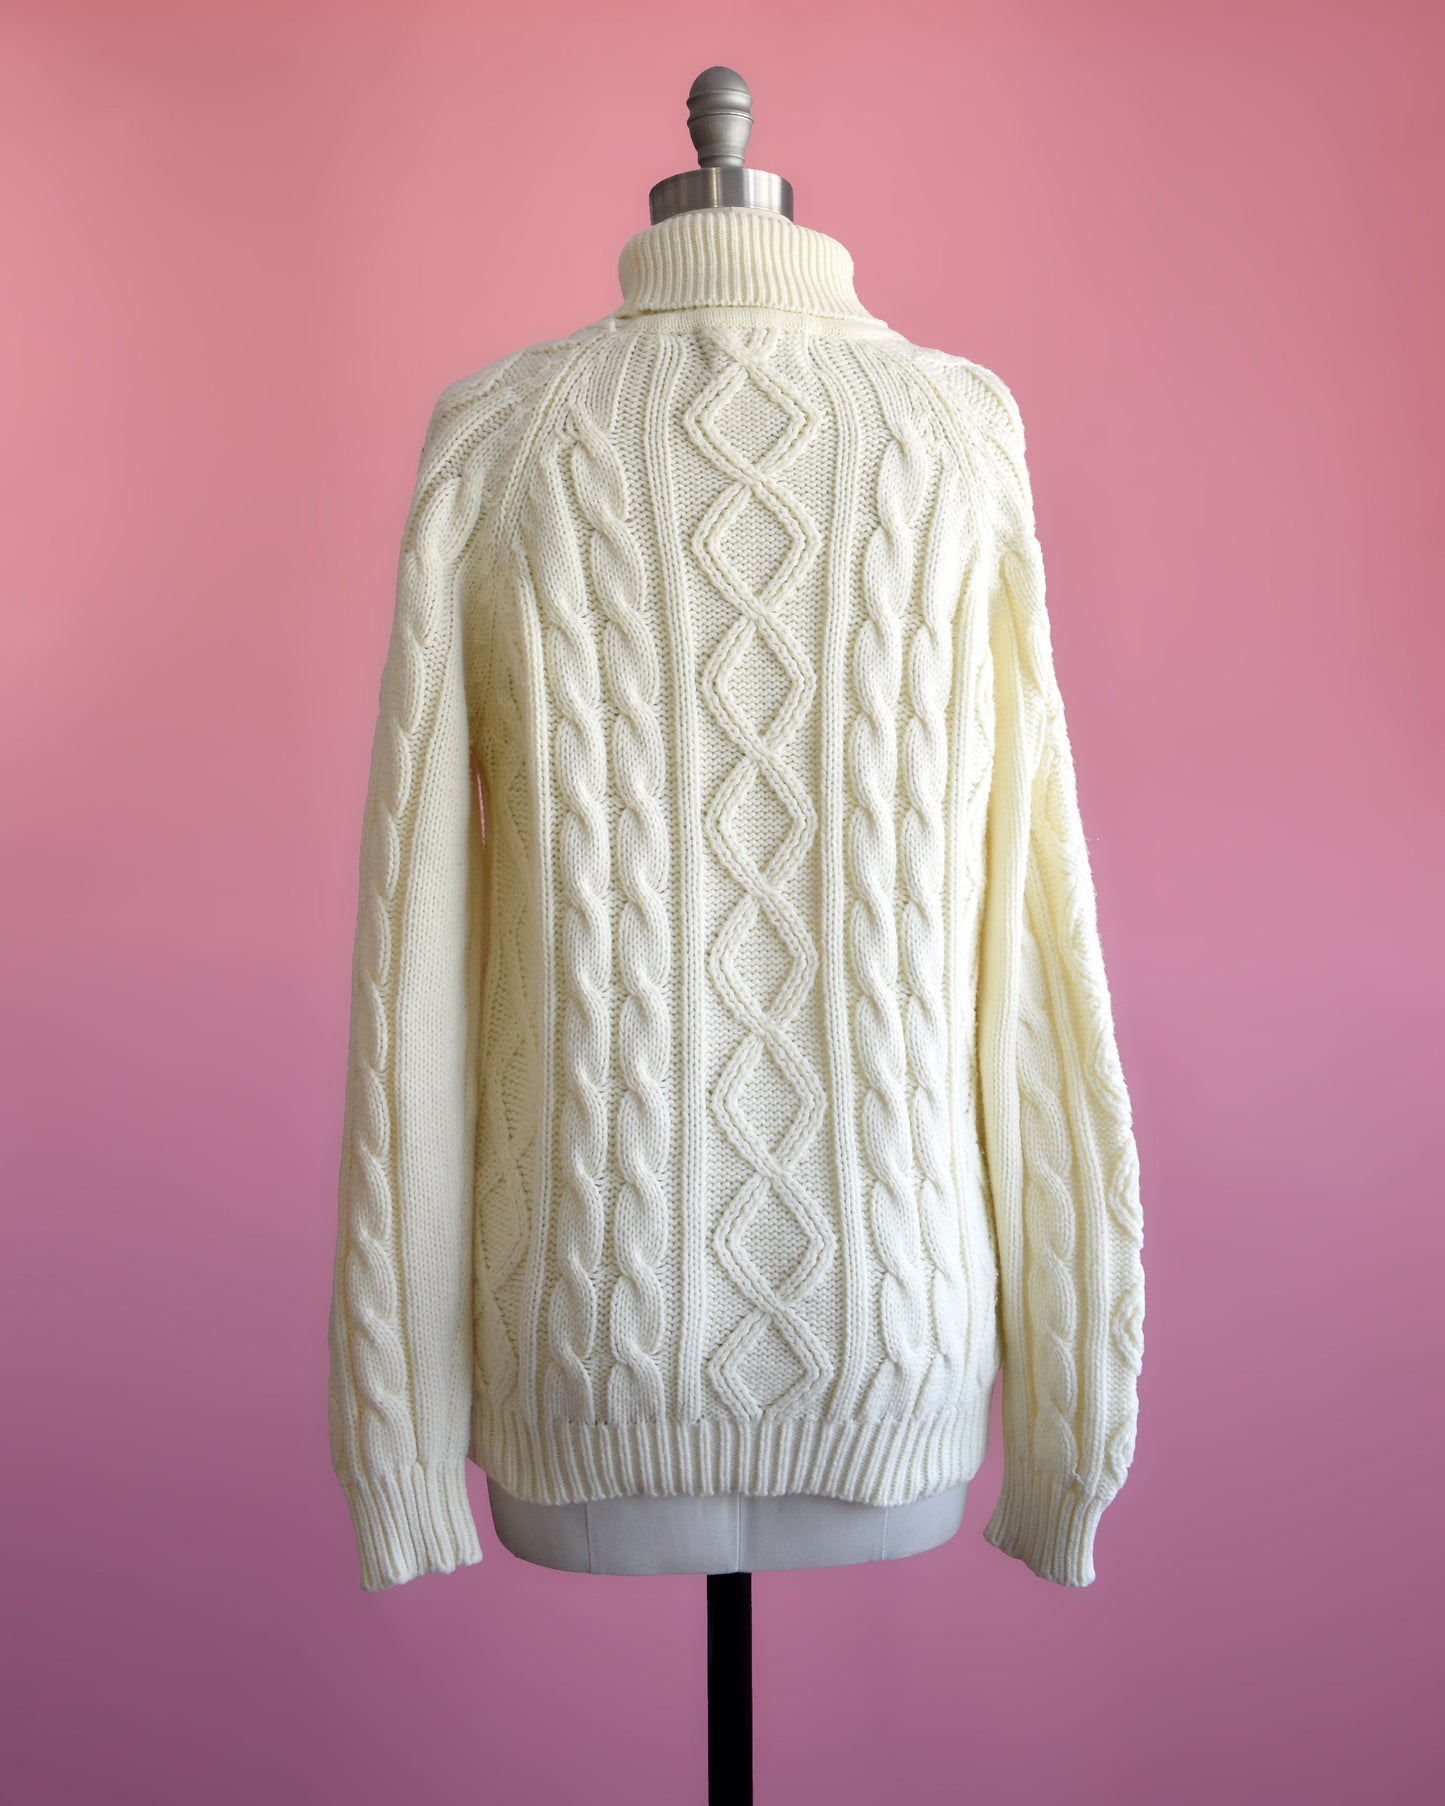 back view of a vintage 70s cream cable knit turtleneck sweater on a dress form set against a pink background